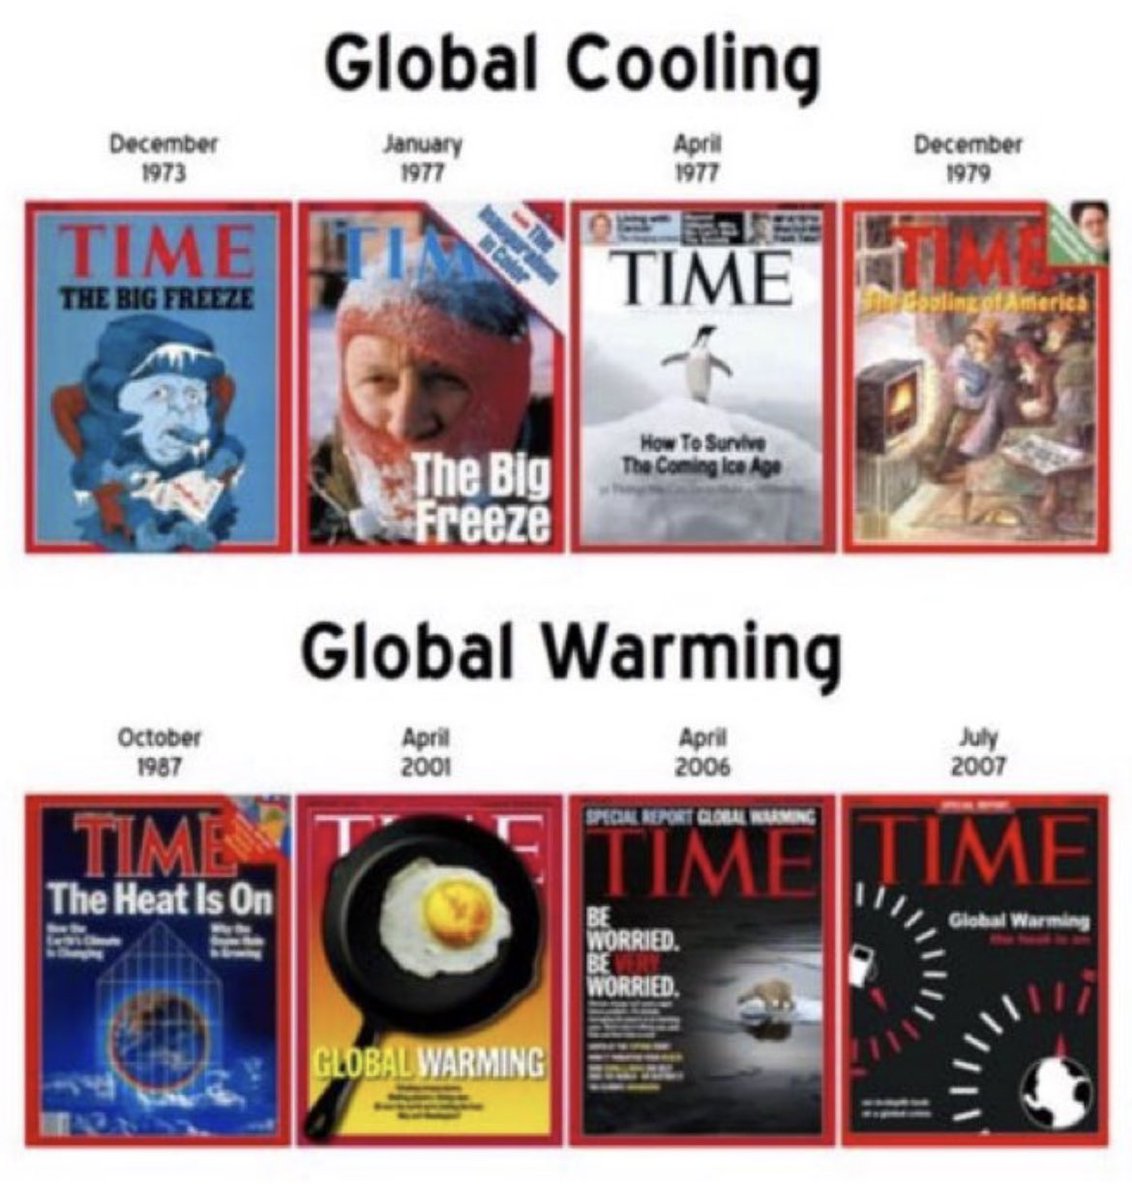 @wideawake_media The #ClimateScam has been decades in the making.